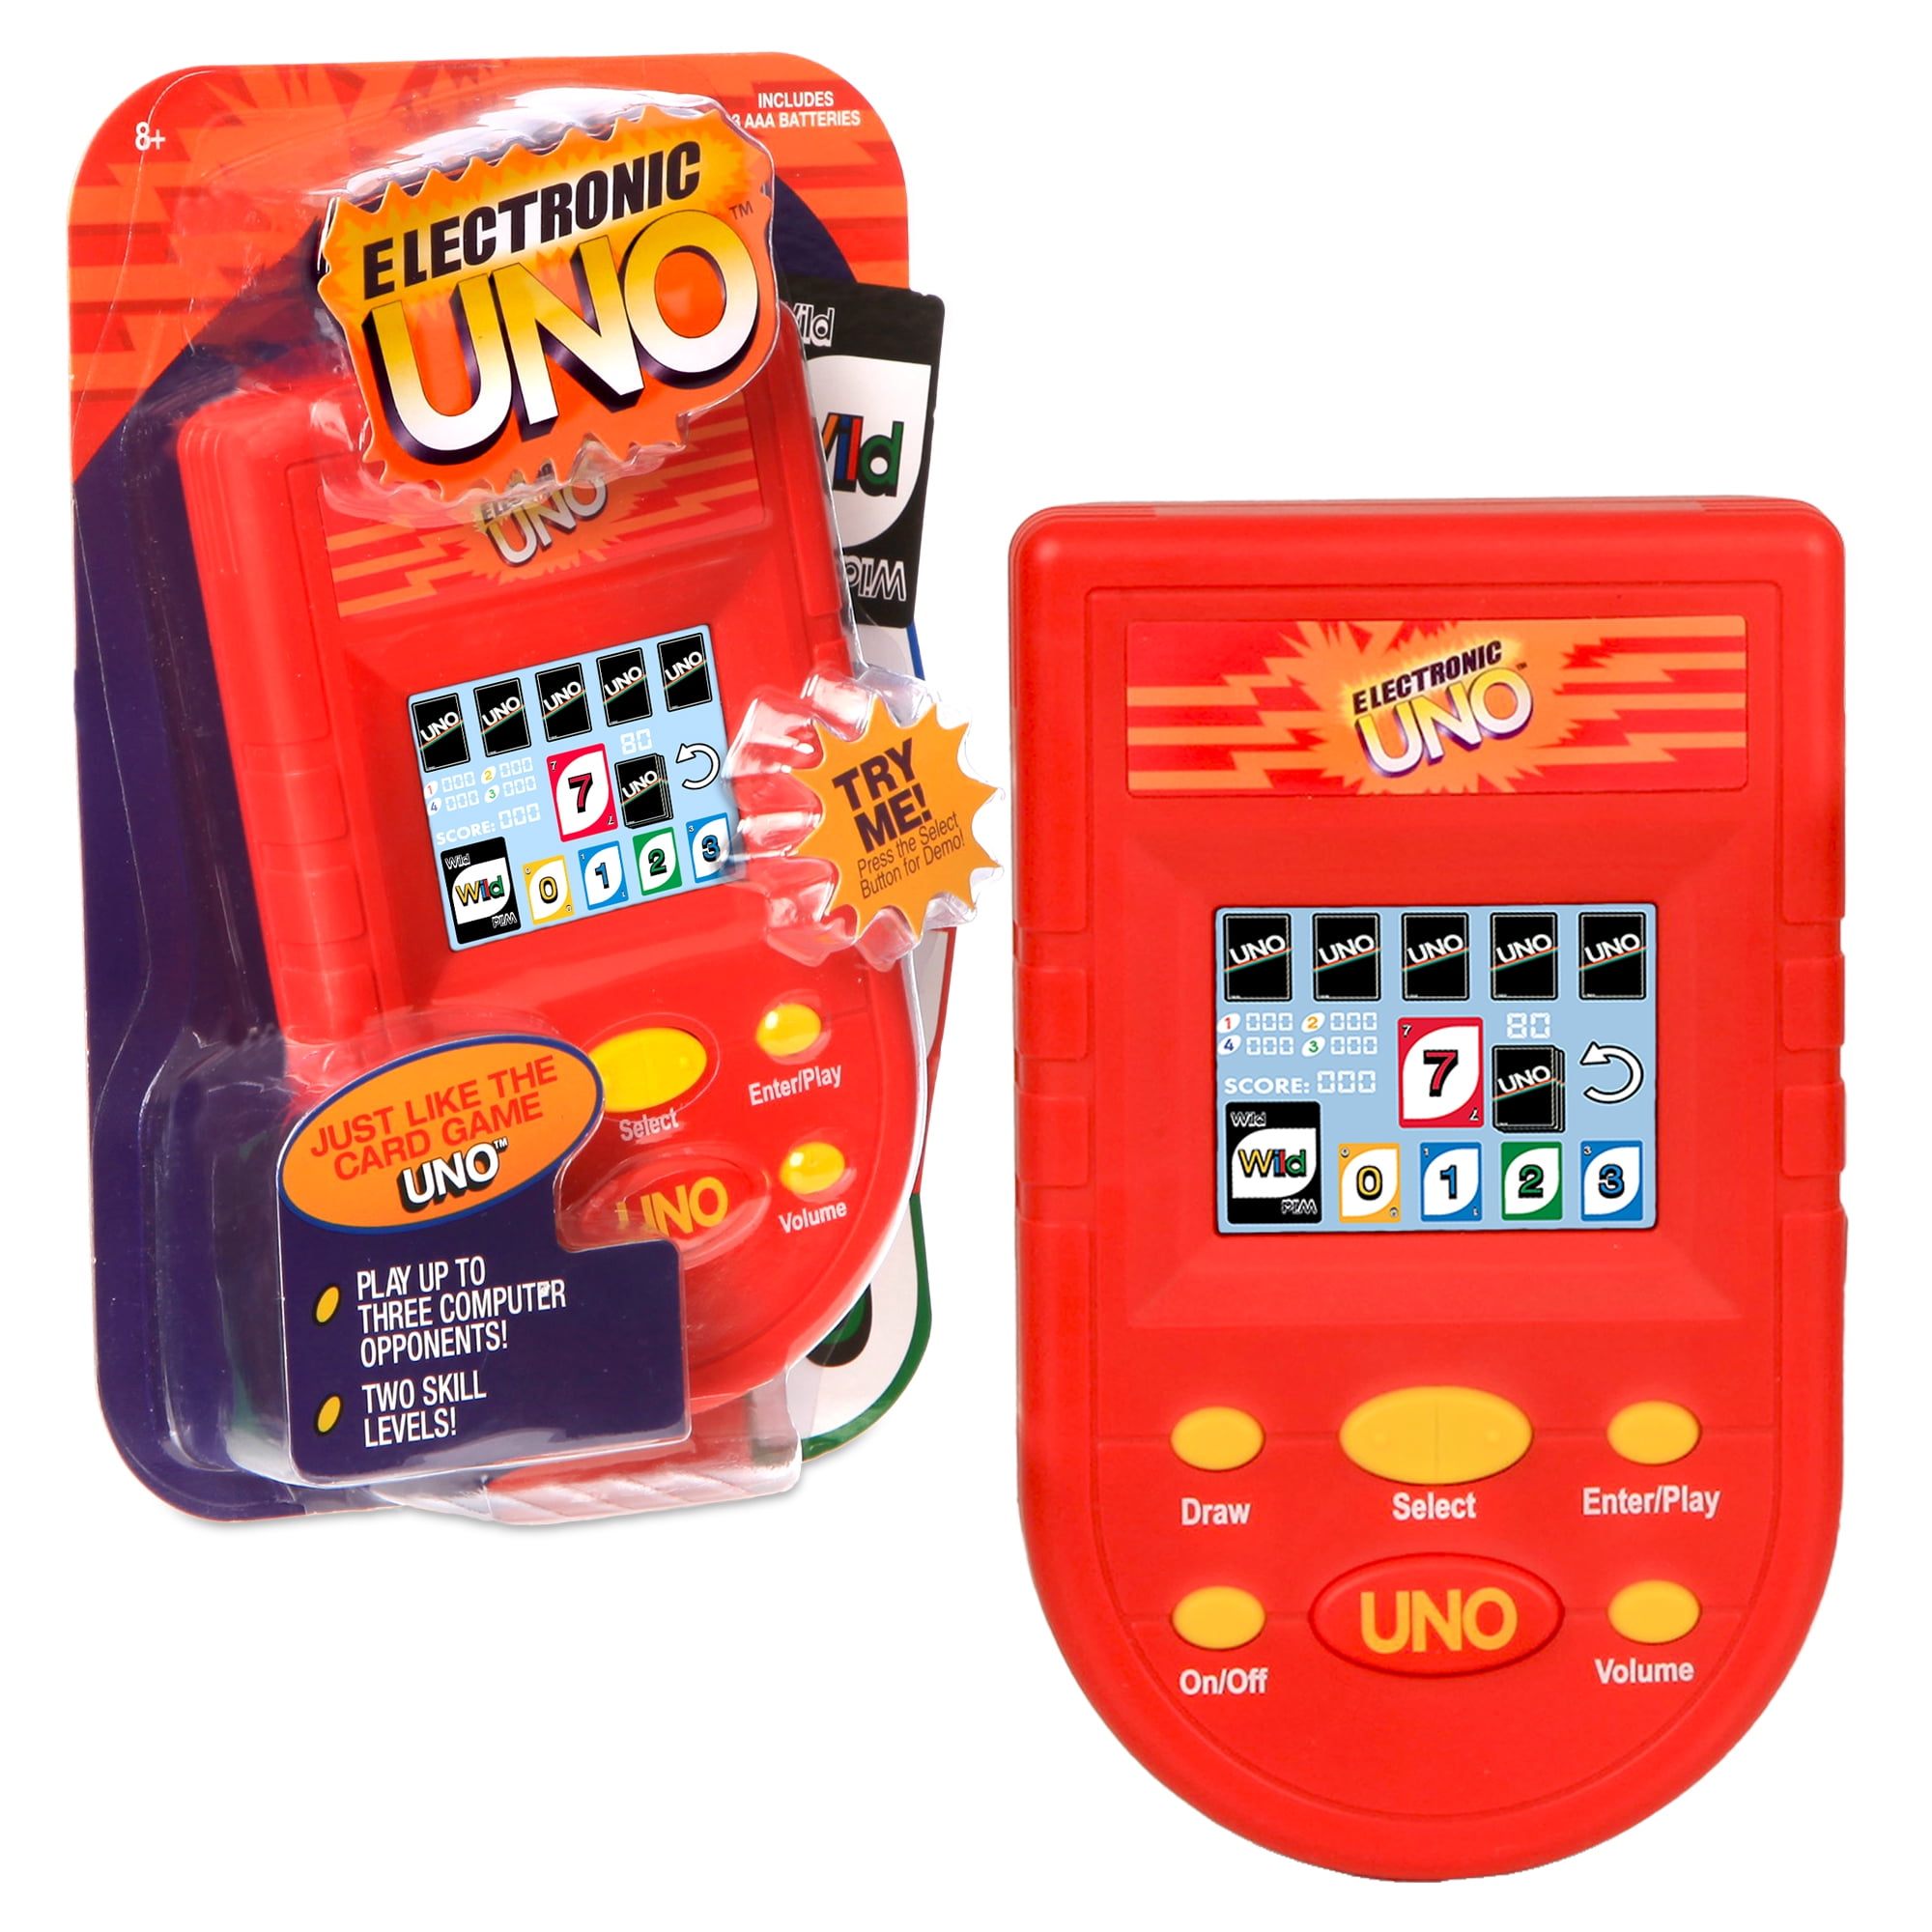 OIK Electronic Sudoku Handheld Portable Number Puzzle Game Travel IQ 